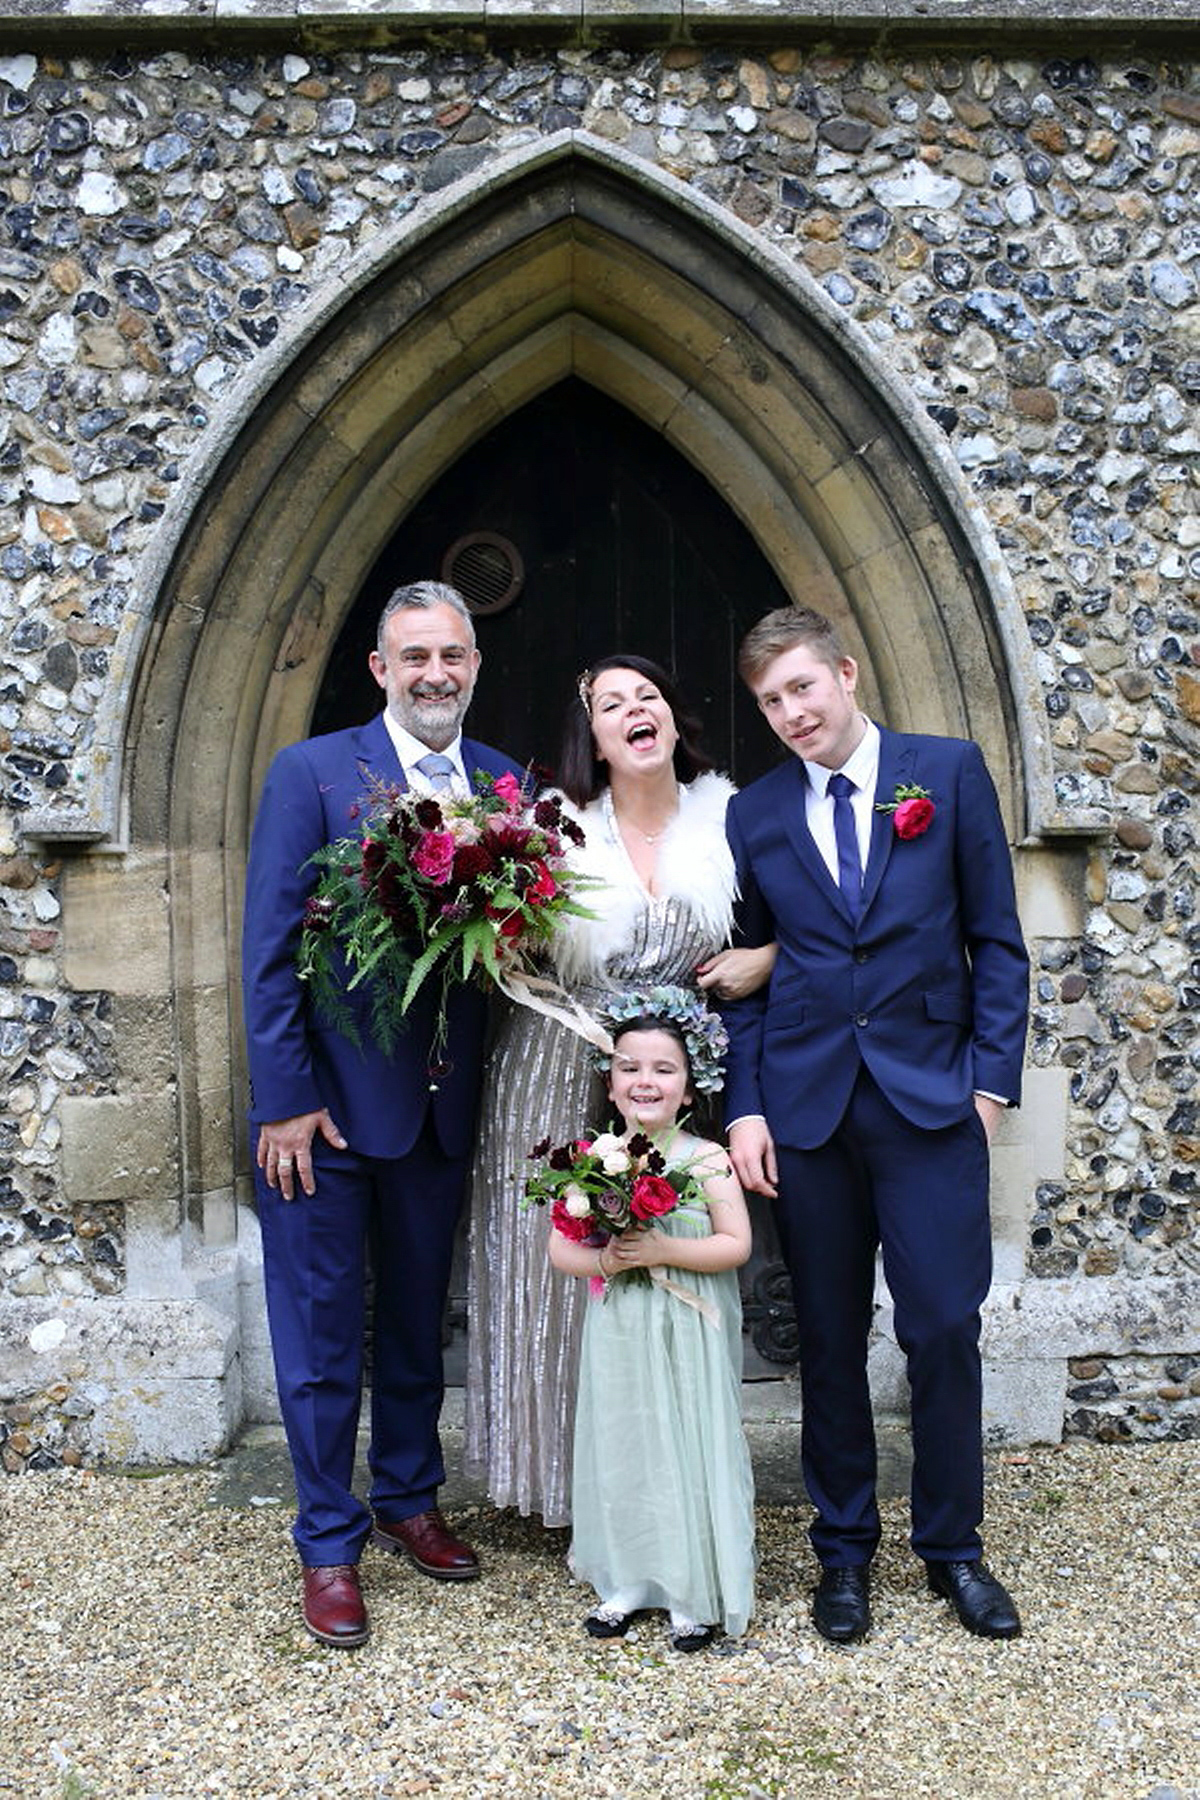 Florist Sam of Violets & Velvet wore a sequin dress by 'Somerset' by Alice Temperley for her colourful and flower-filled village hall wedding. Photography by Rebecca Prigmore.